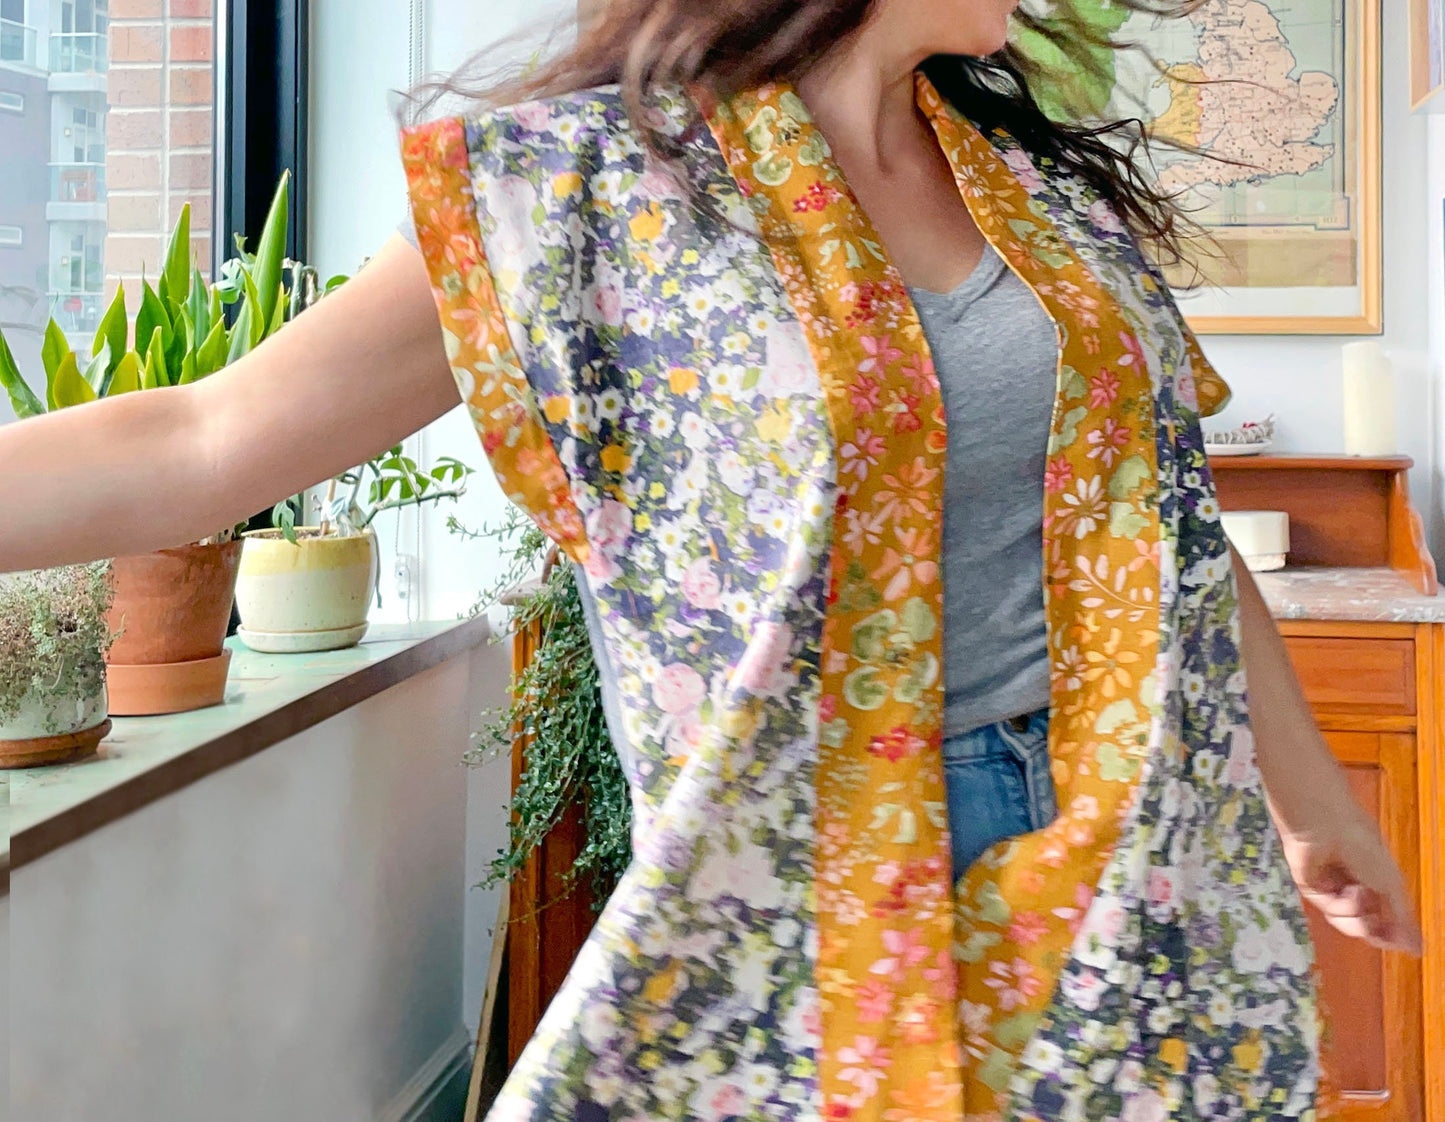 UPcycled Textiles Super Vest